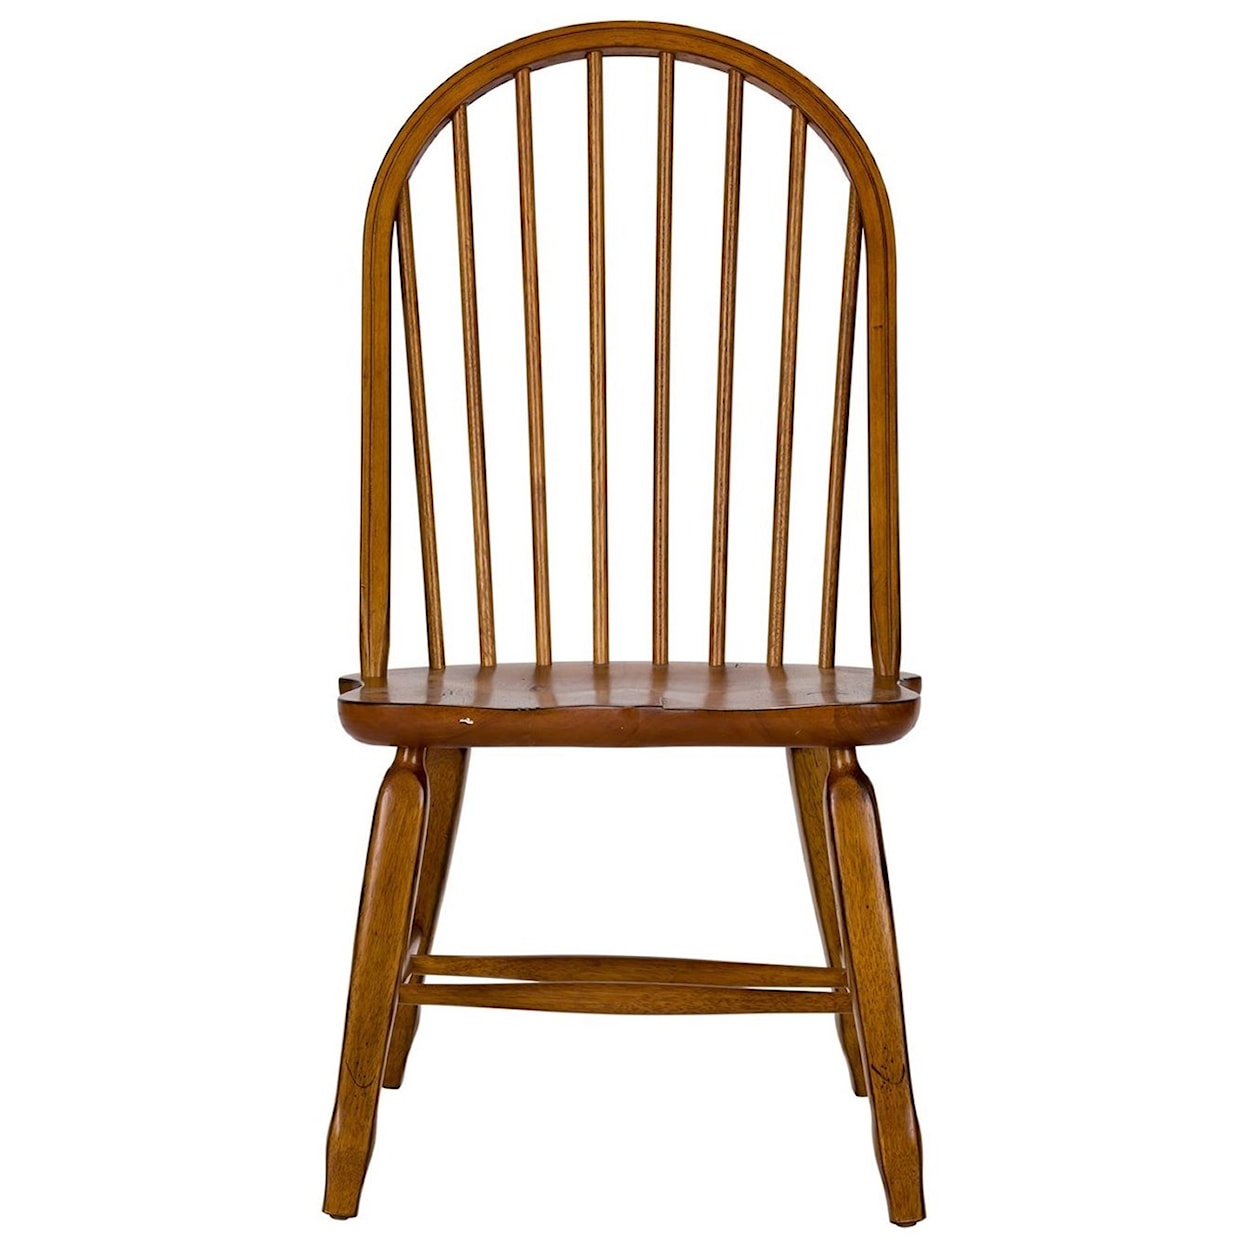 Freedom Furniture Treasures 17 Bow Back Side Chair